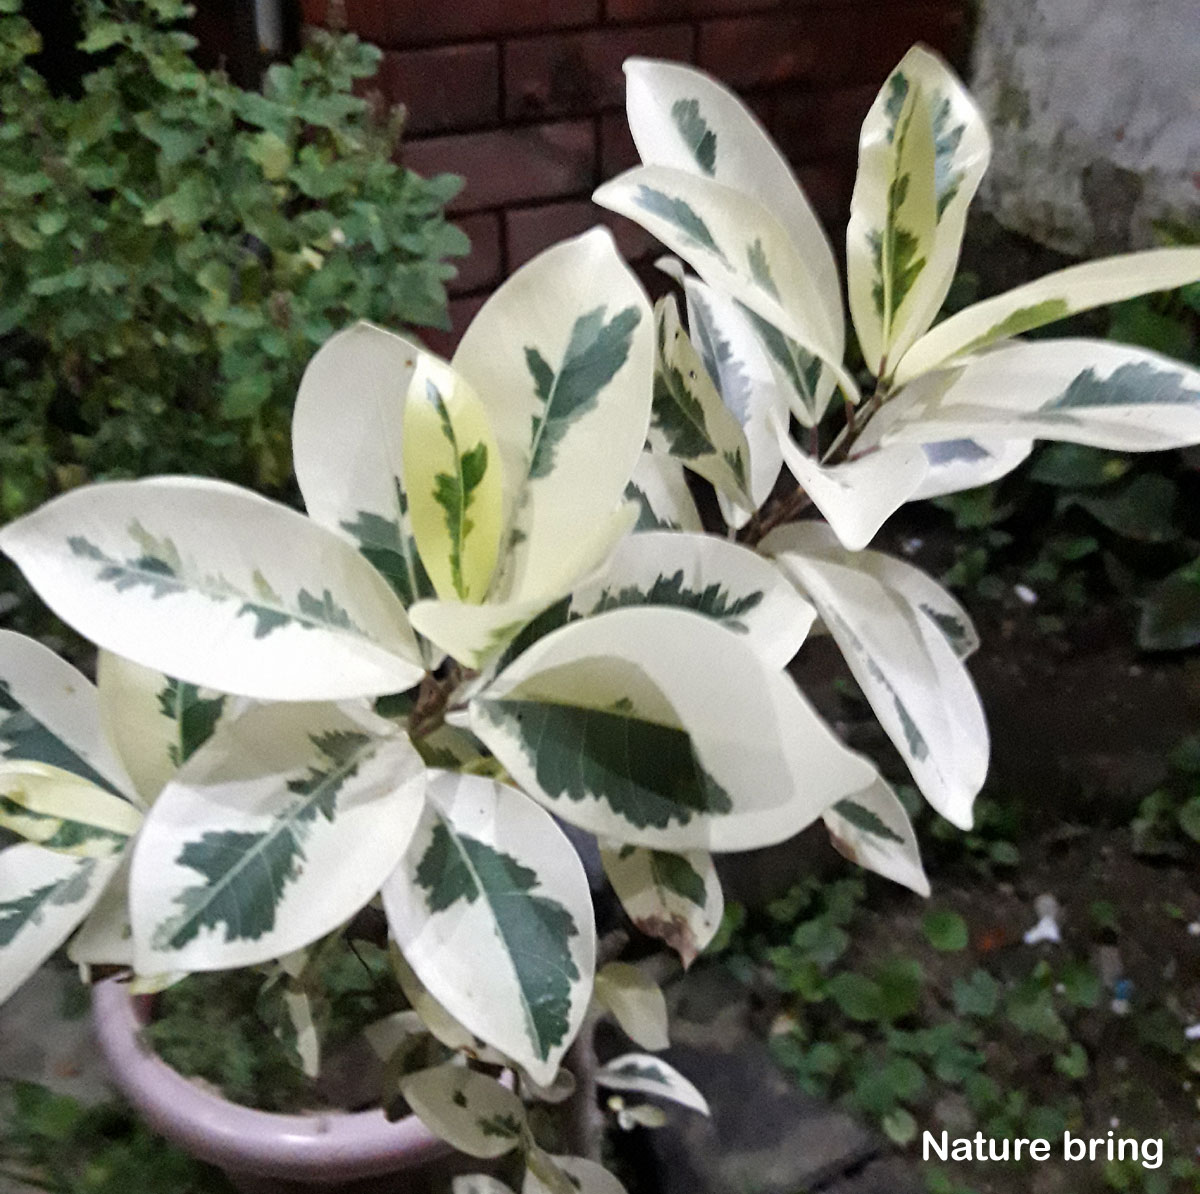 Ficus plants (Ficus benjamina) are not challenging to grow, and most people above beginners can manage to grow them and maintain them quite well. ..read...naturebring.com/ficus-plant-fi… #naturebring #ficusplant #ficusbenjamina #care #ficus #houseplants